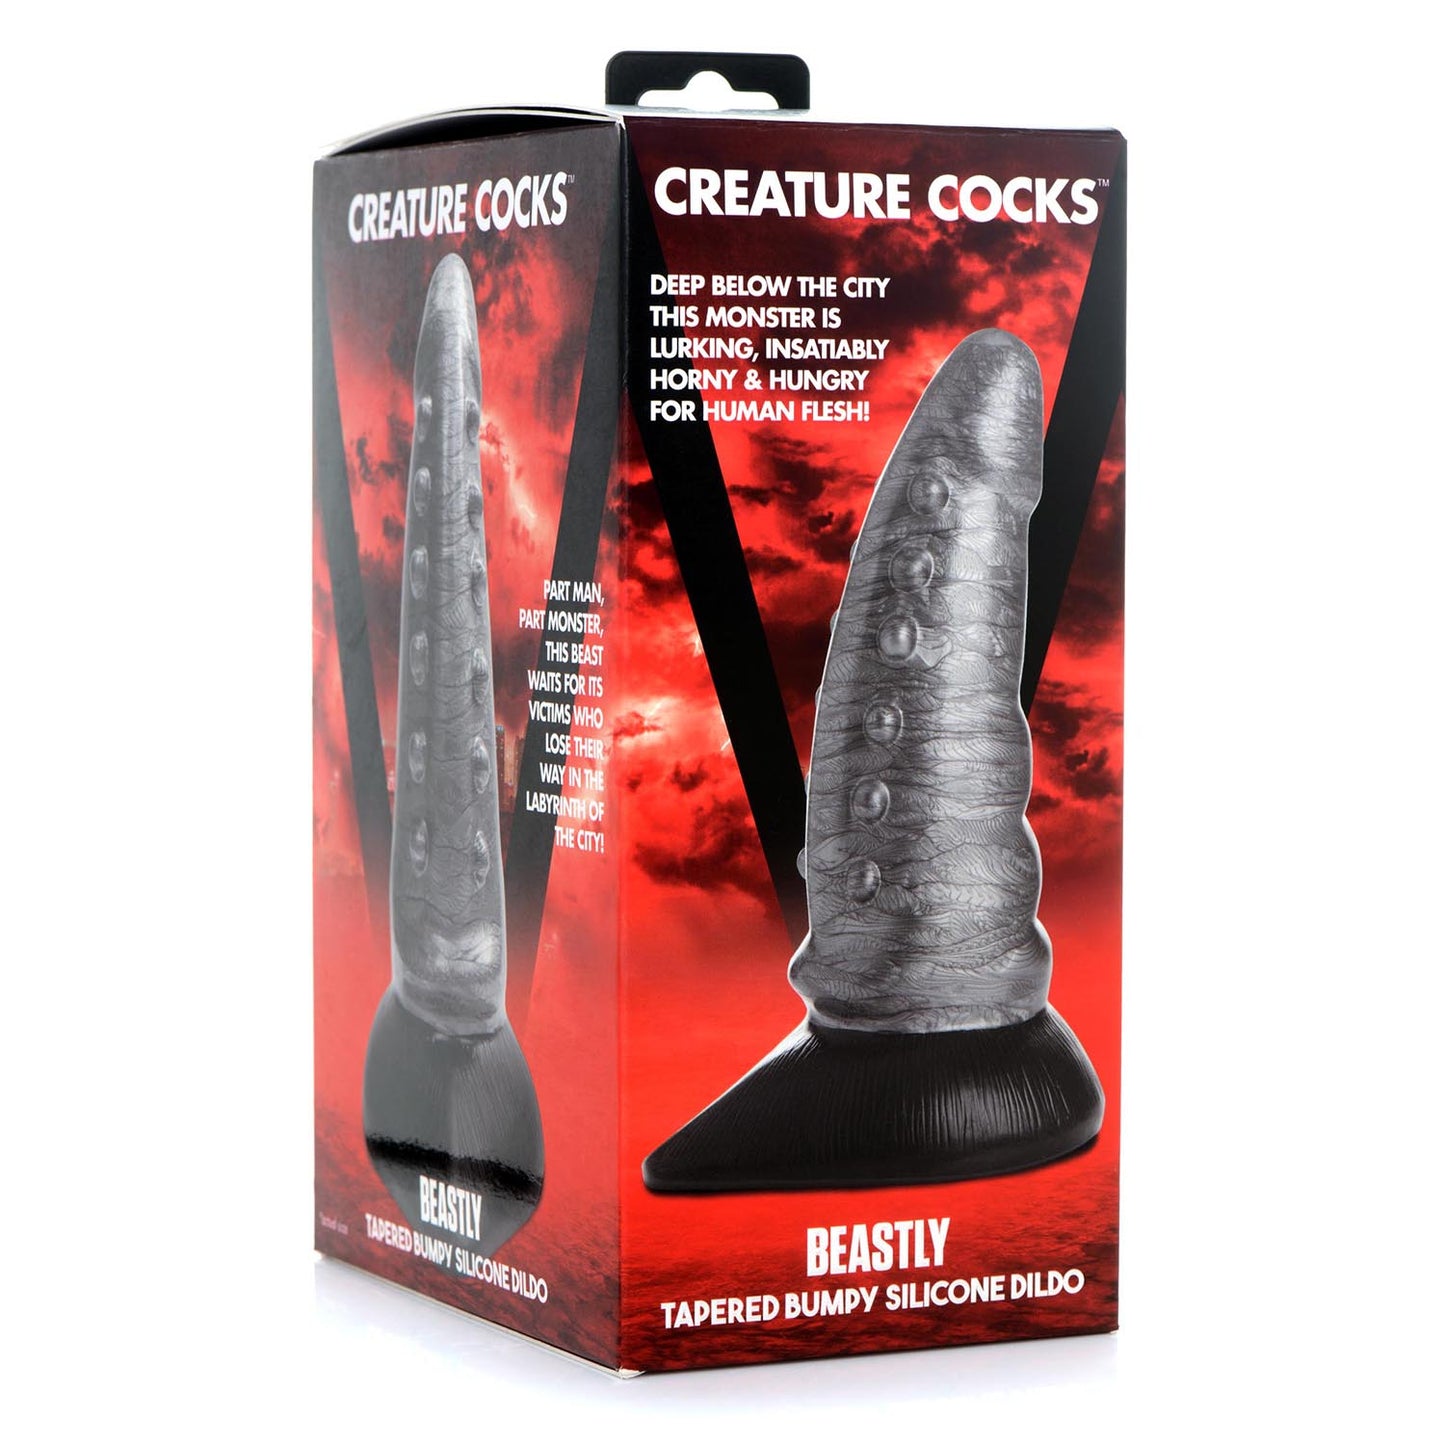 Beastly Tapered Bumpy Silicone Creature Dildo - Thorn & Feather